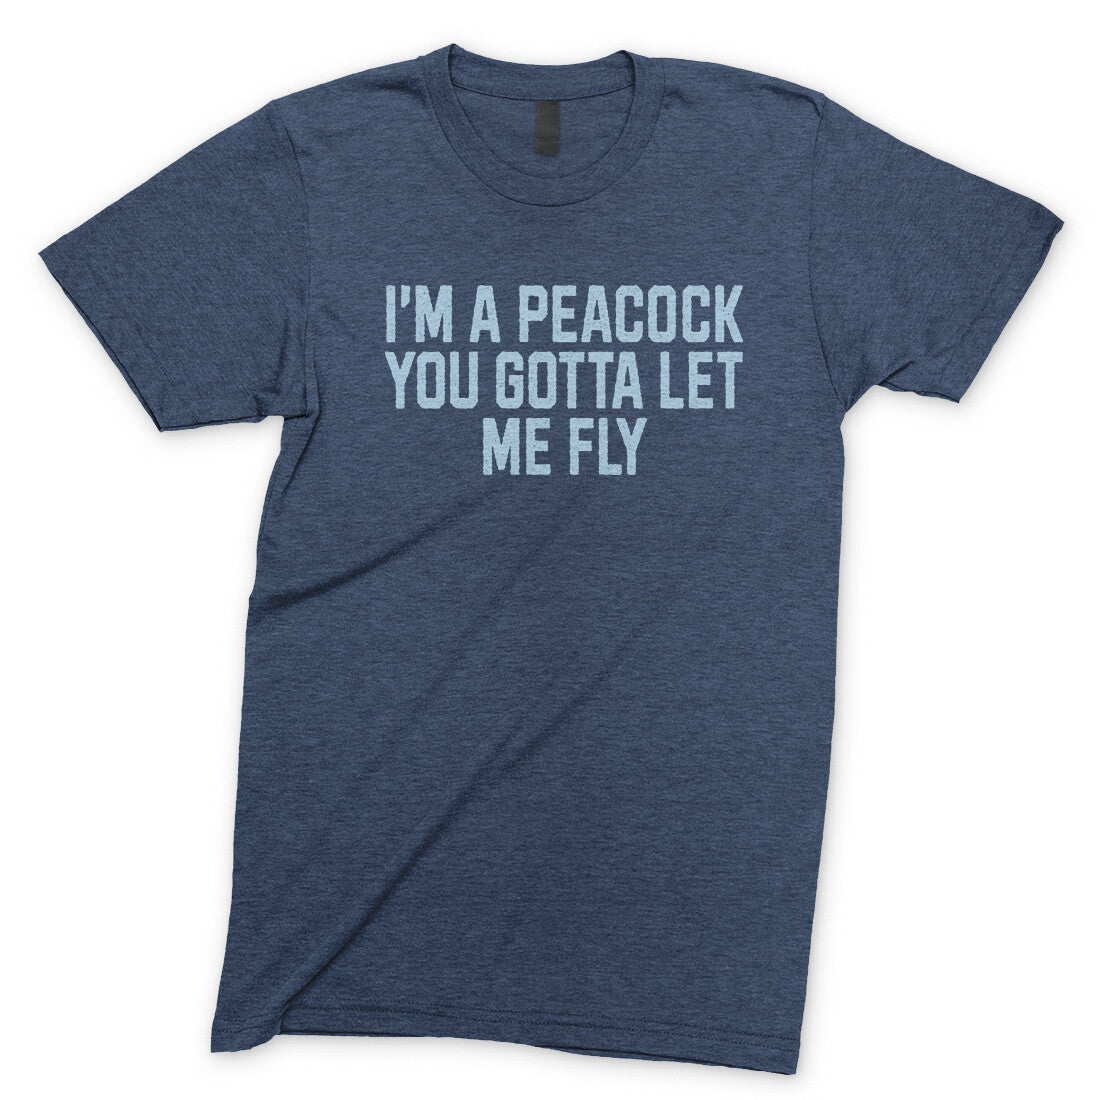 I'm a Peacock You Gotta Let me Fly in Navy Heather Color